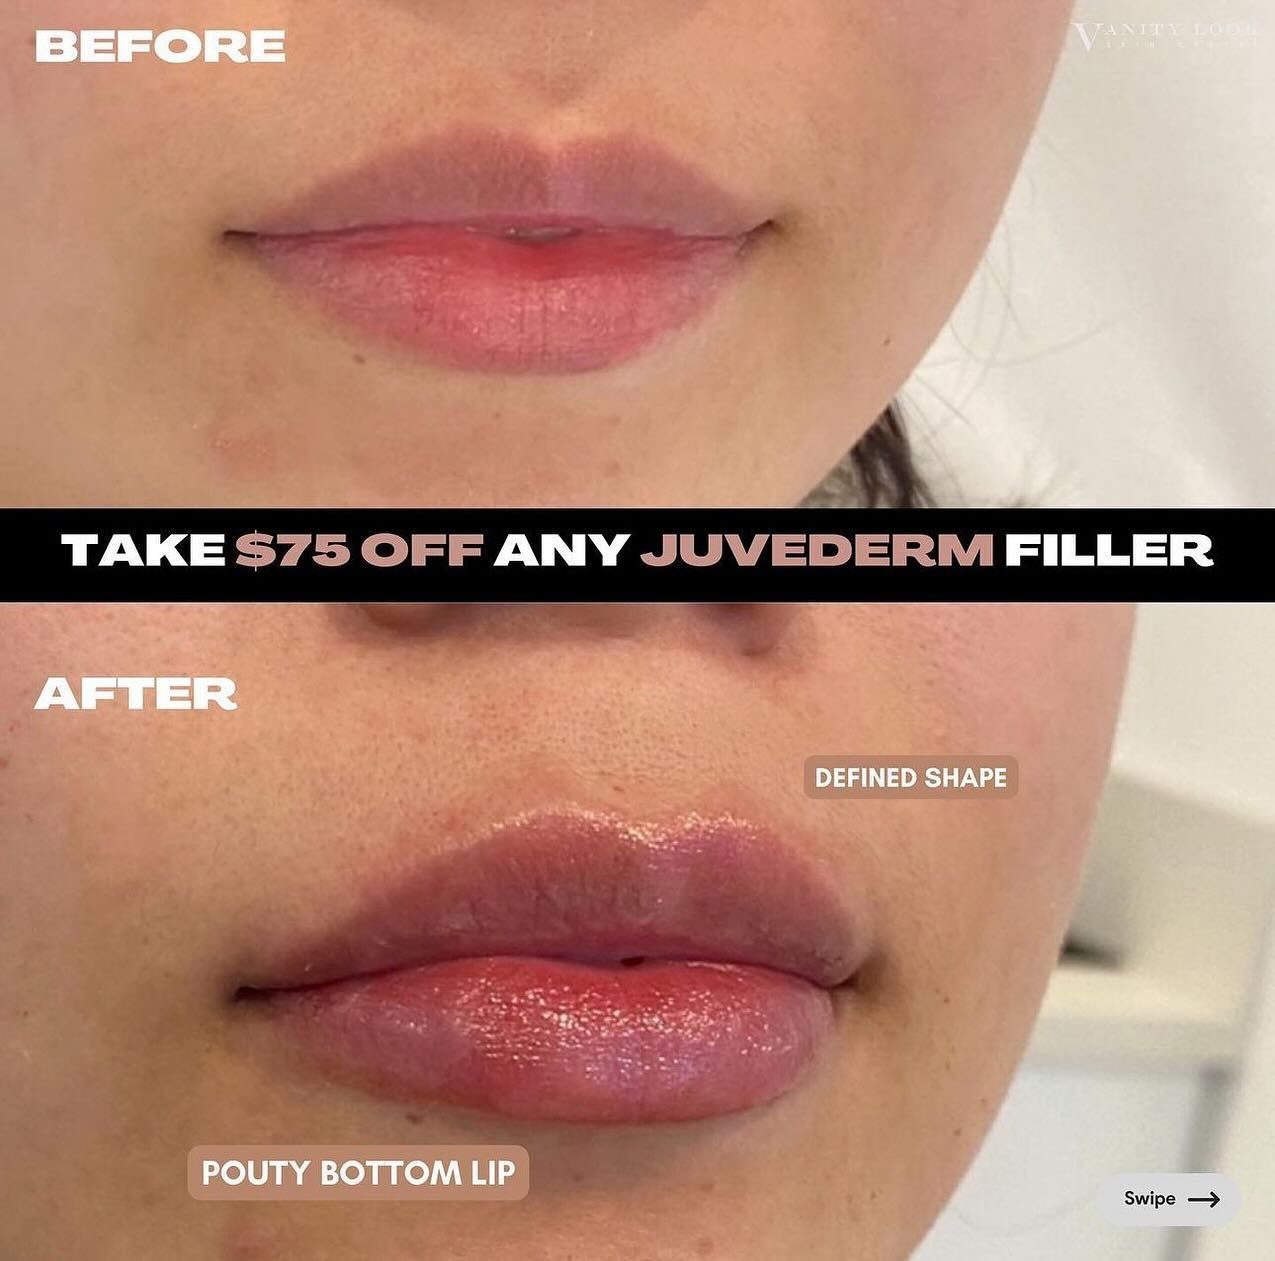 PLUMP PERFECTION 💉👄 Head to the link in our bio to add your $75 off to your Allē wallet. 

Services we offer:
▪️ Fillers 
▪️ Anti-aging treatments
▪️ Facial Balancing
▪️ Laser Hair Removal
▪️ Skin Rejuvenation
▪️ Morpheus8 for face and body
▪️ PRX 